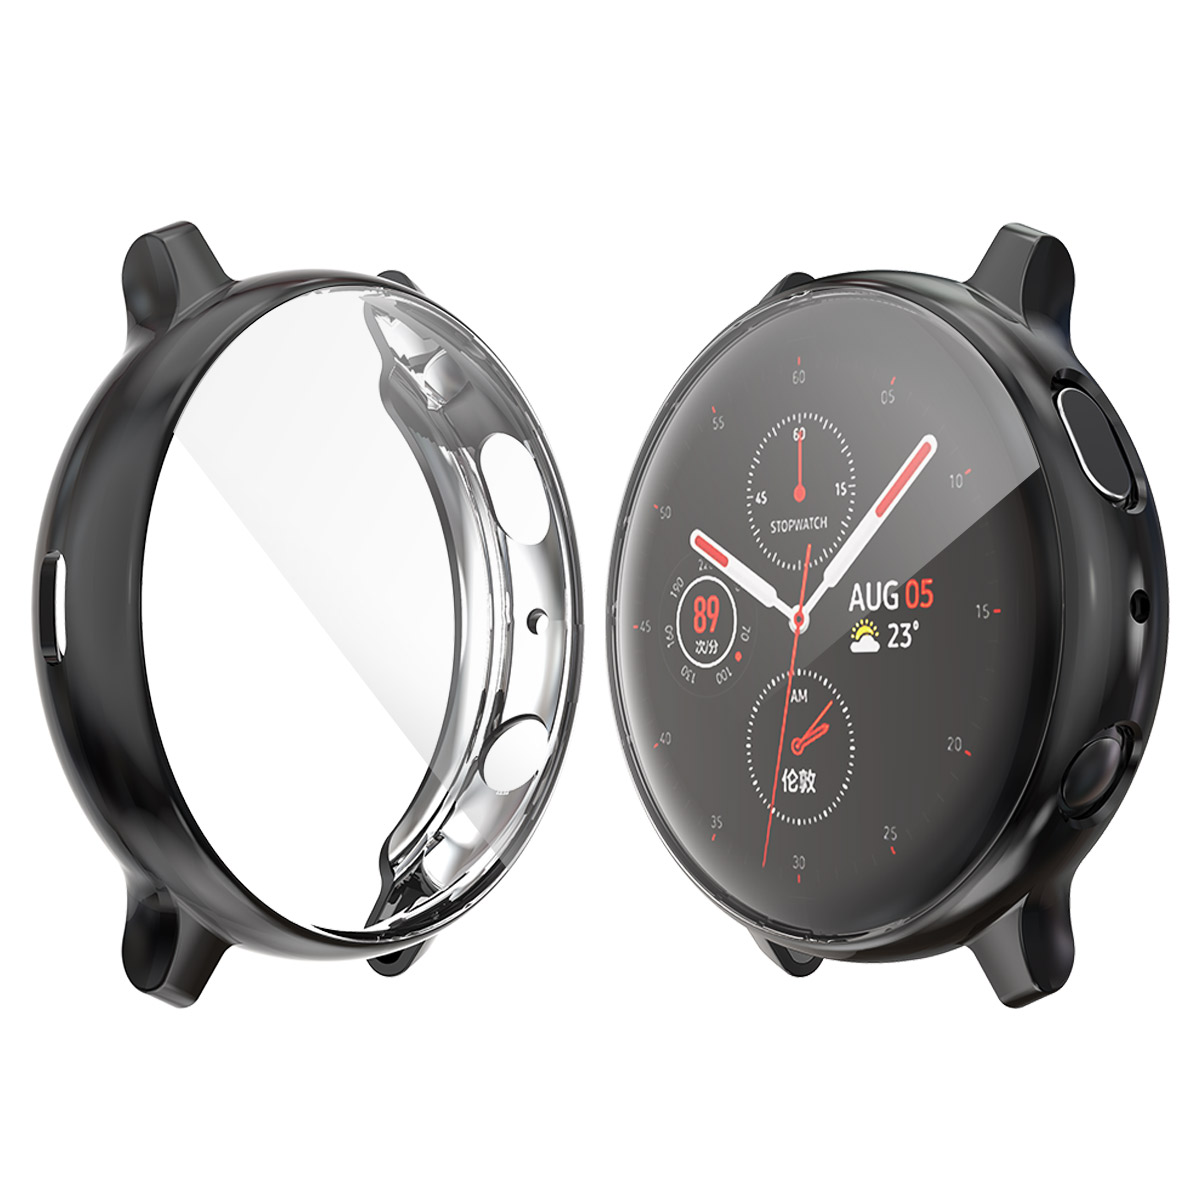 Enkay-Plating-Full-Cover-TPU-Watch-Cover-Screen-Protector-for-Galaxy-Watch-Active-2-44mm-1604974-1